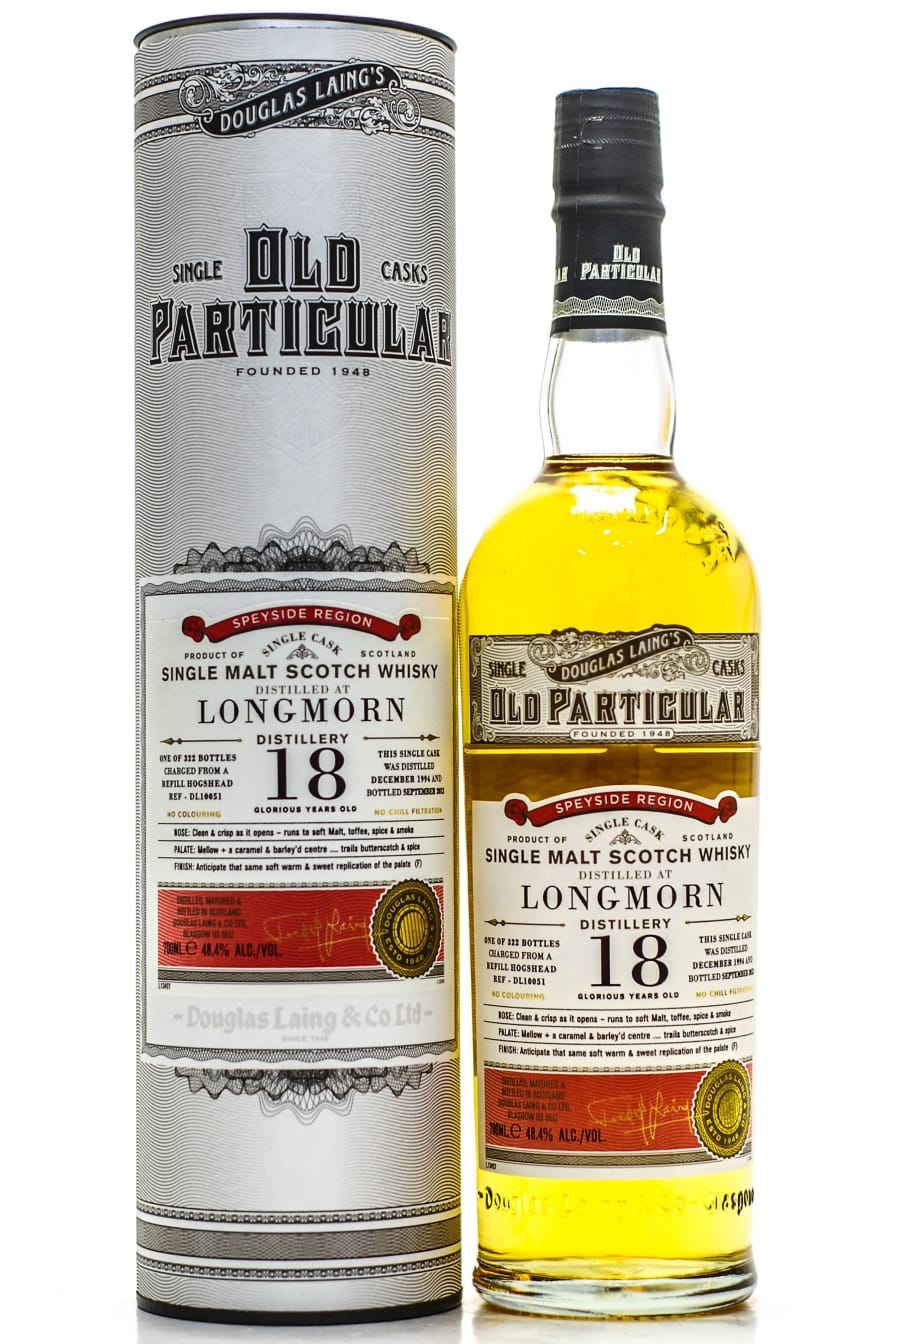 Longmorn - 18 Years Old Particular Cask DL10051 48.4% 1994 In Original Container